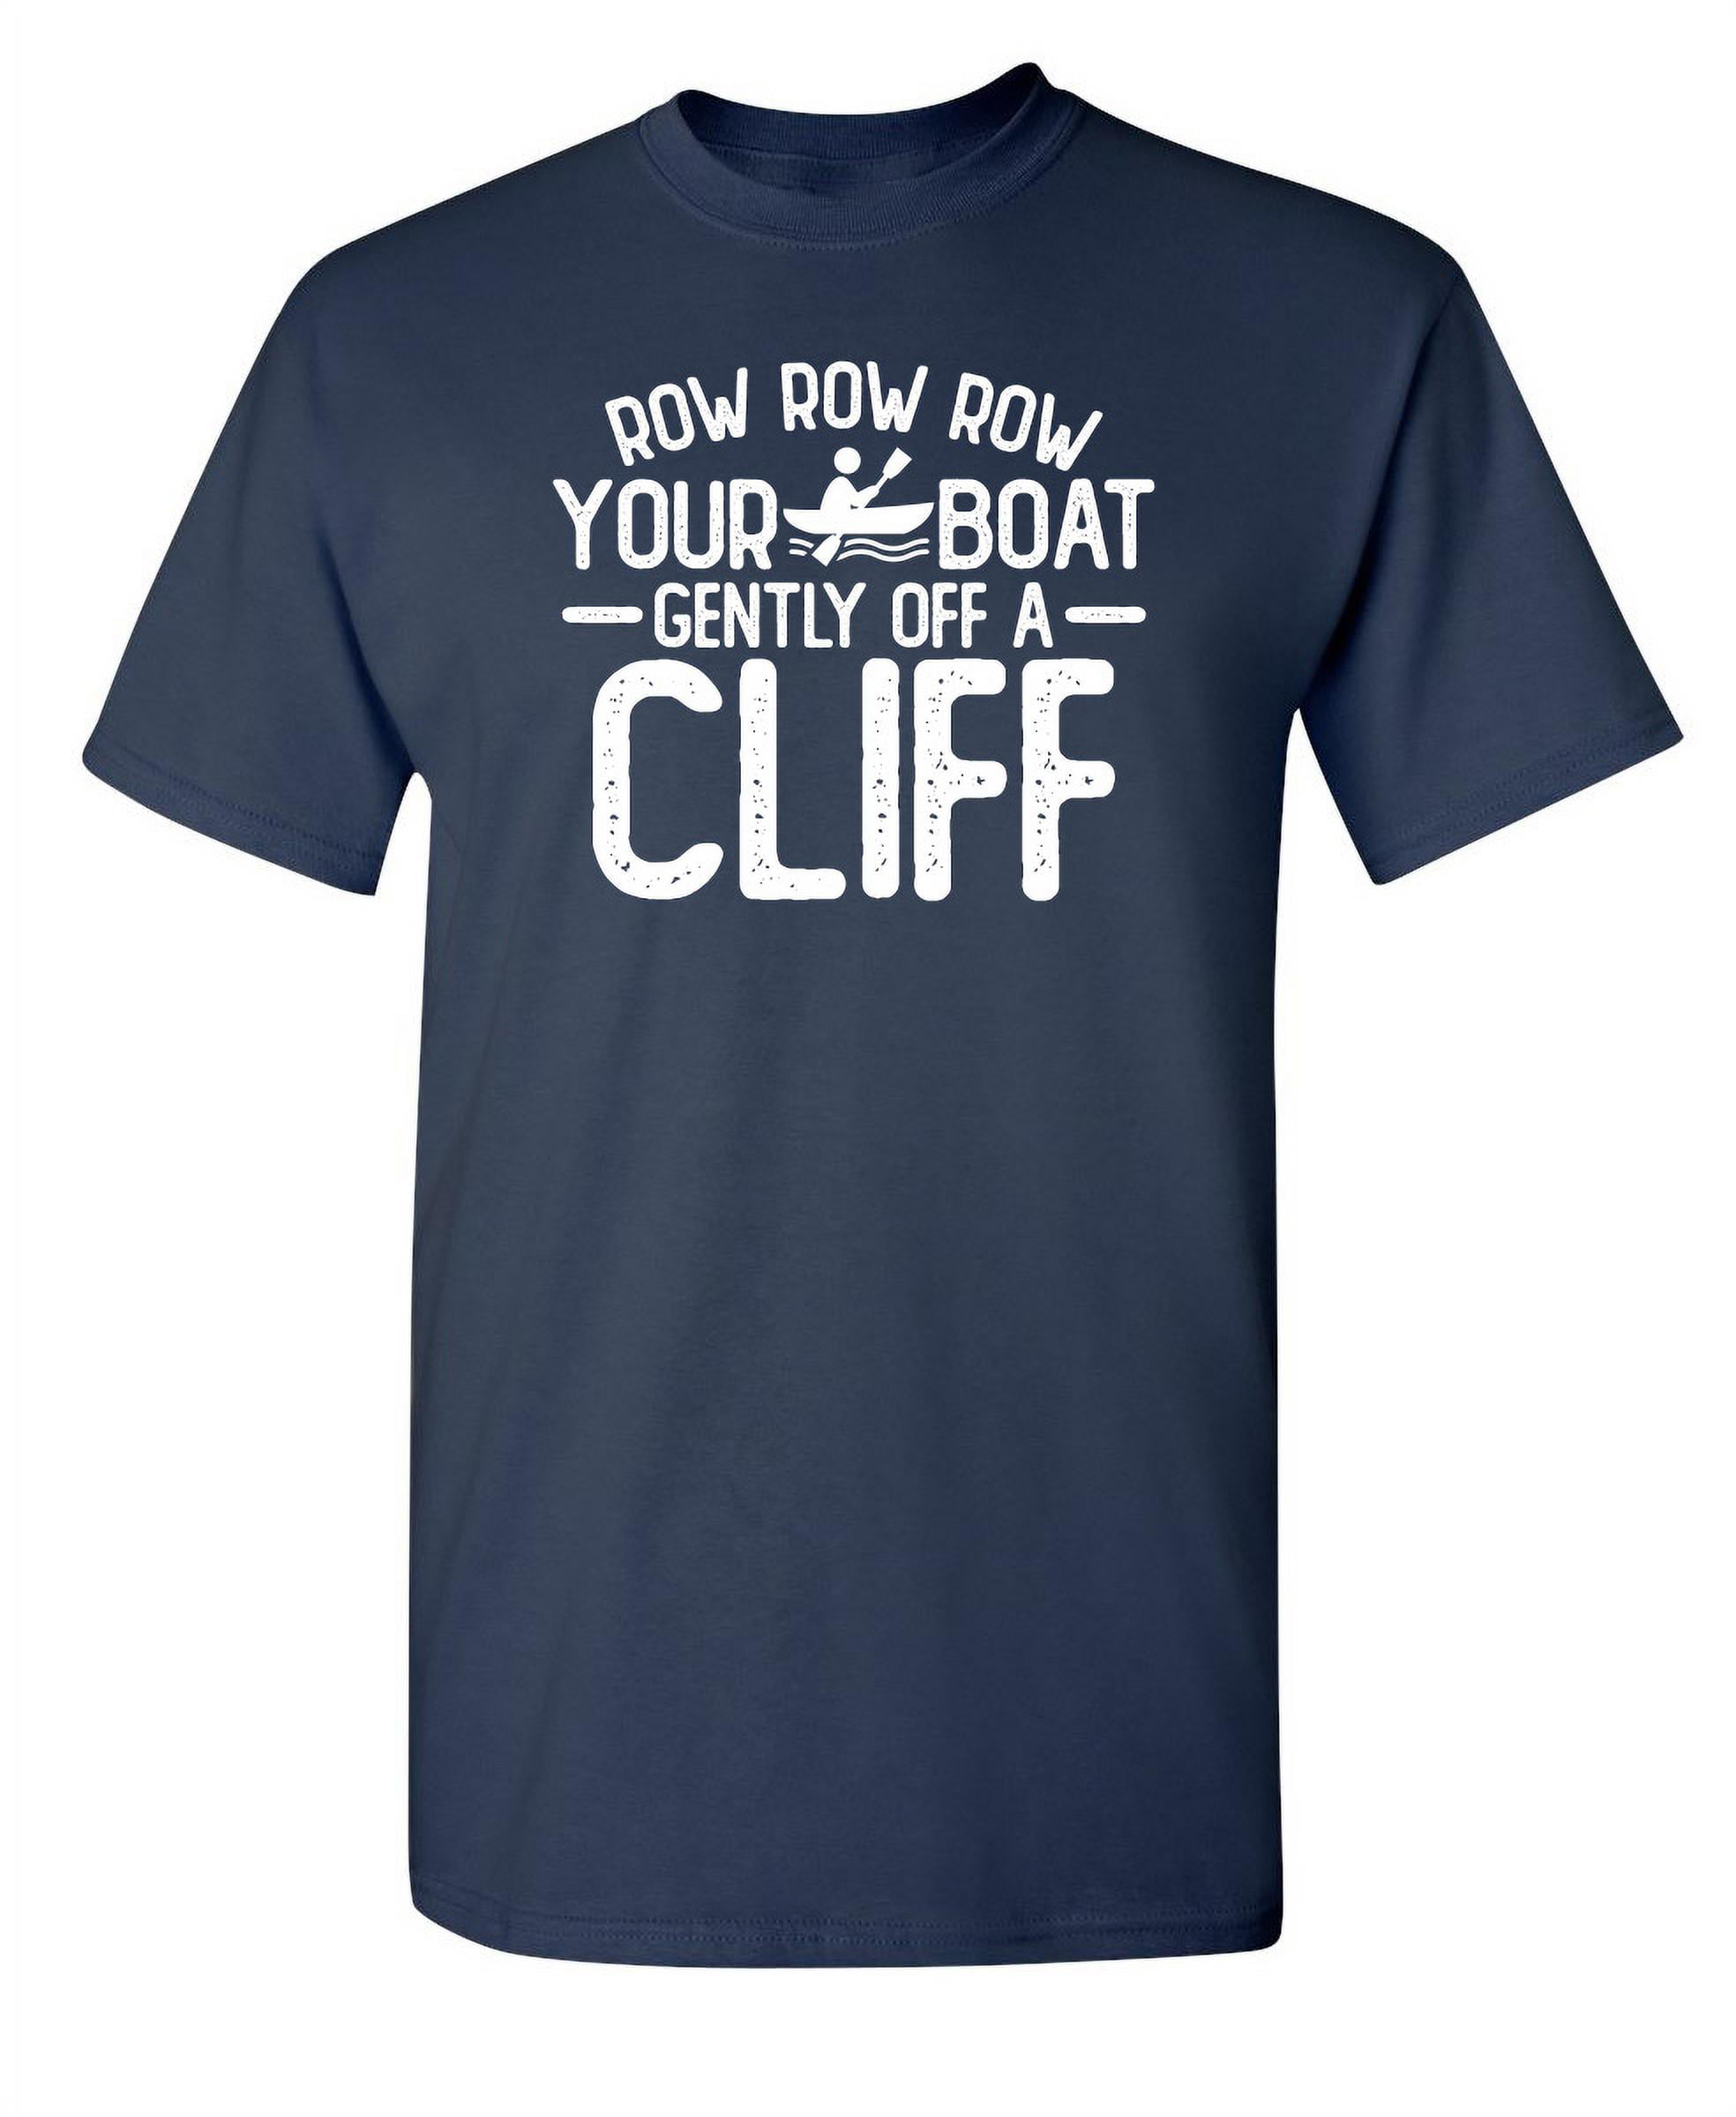 Row Row Row Your Boat Gently Off A Cliff Sarcastic Humor Graphic Novelty  Funny Youth T Shirt 